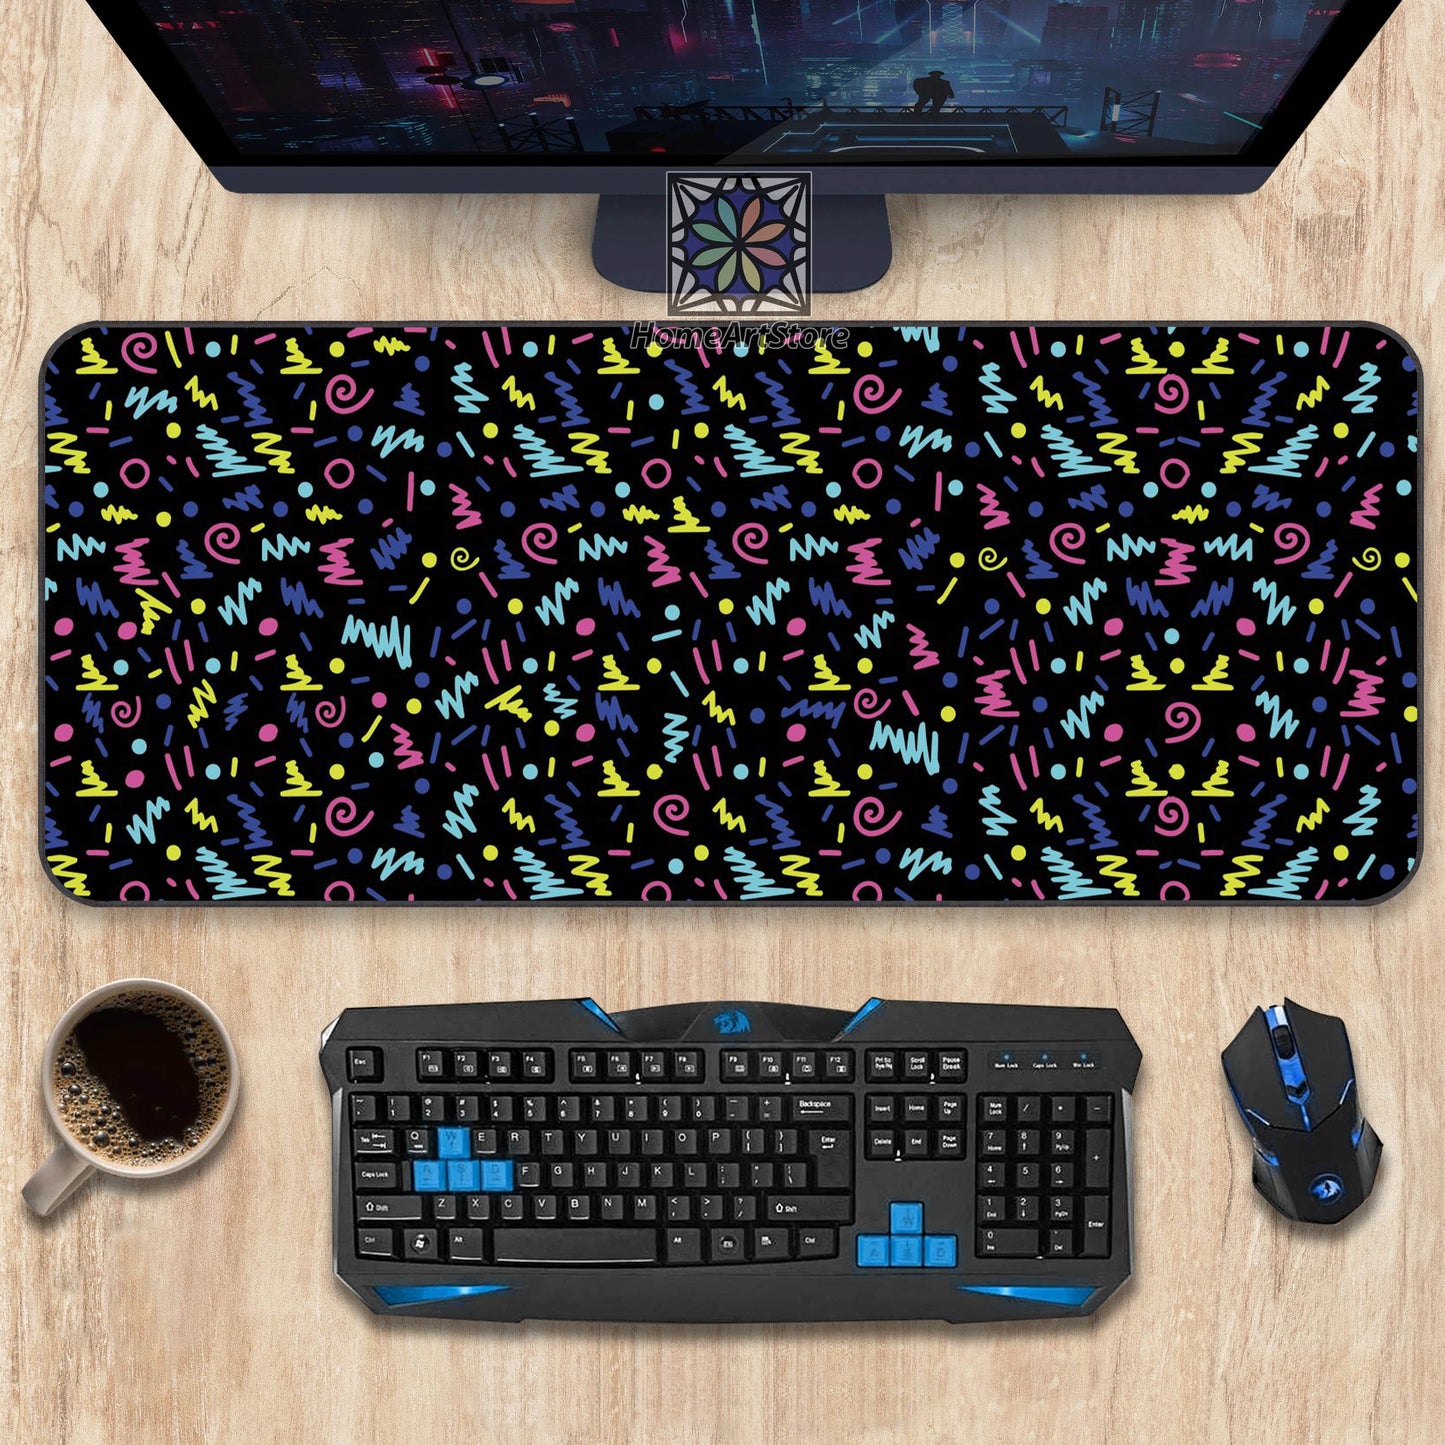 Classic Arcade Game Desk Mat, 90s Gaming Mouse Mat, Aesthetic Gamer Mouse Pad, Colorful Game Decor